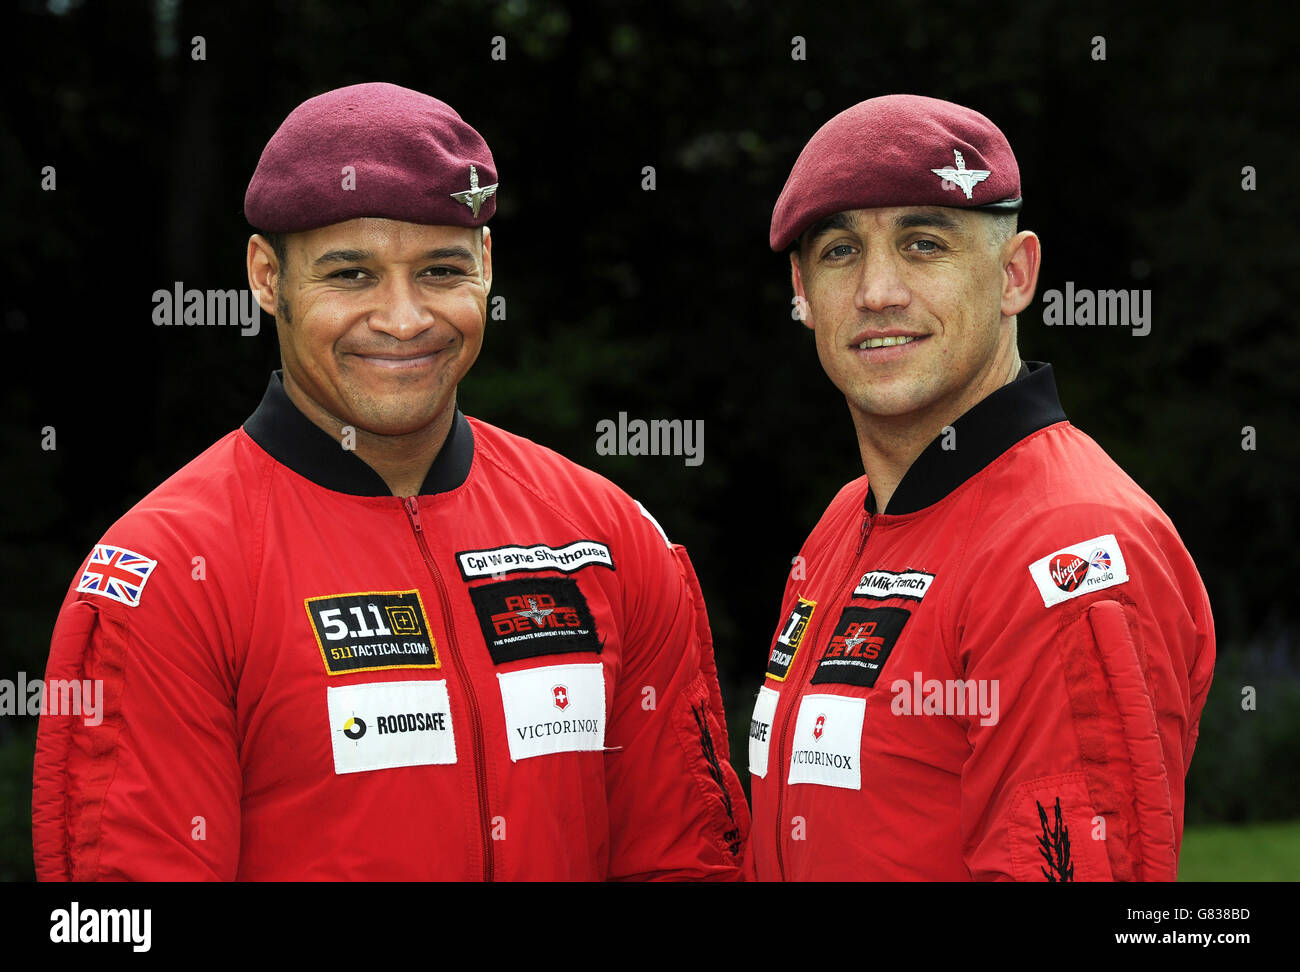 Red Devils parachute display team members Corporal Mike French (right) and Corporal Wayne Shorthouse who were involved in an aerial incident during a display at the Whitehaven Air Show during a photocall in Ripon, North Yorkshire. Stock Photo